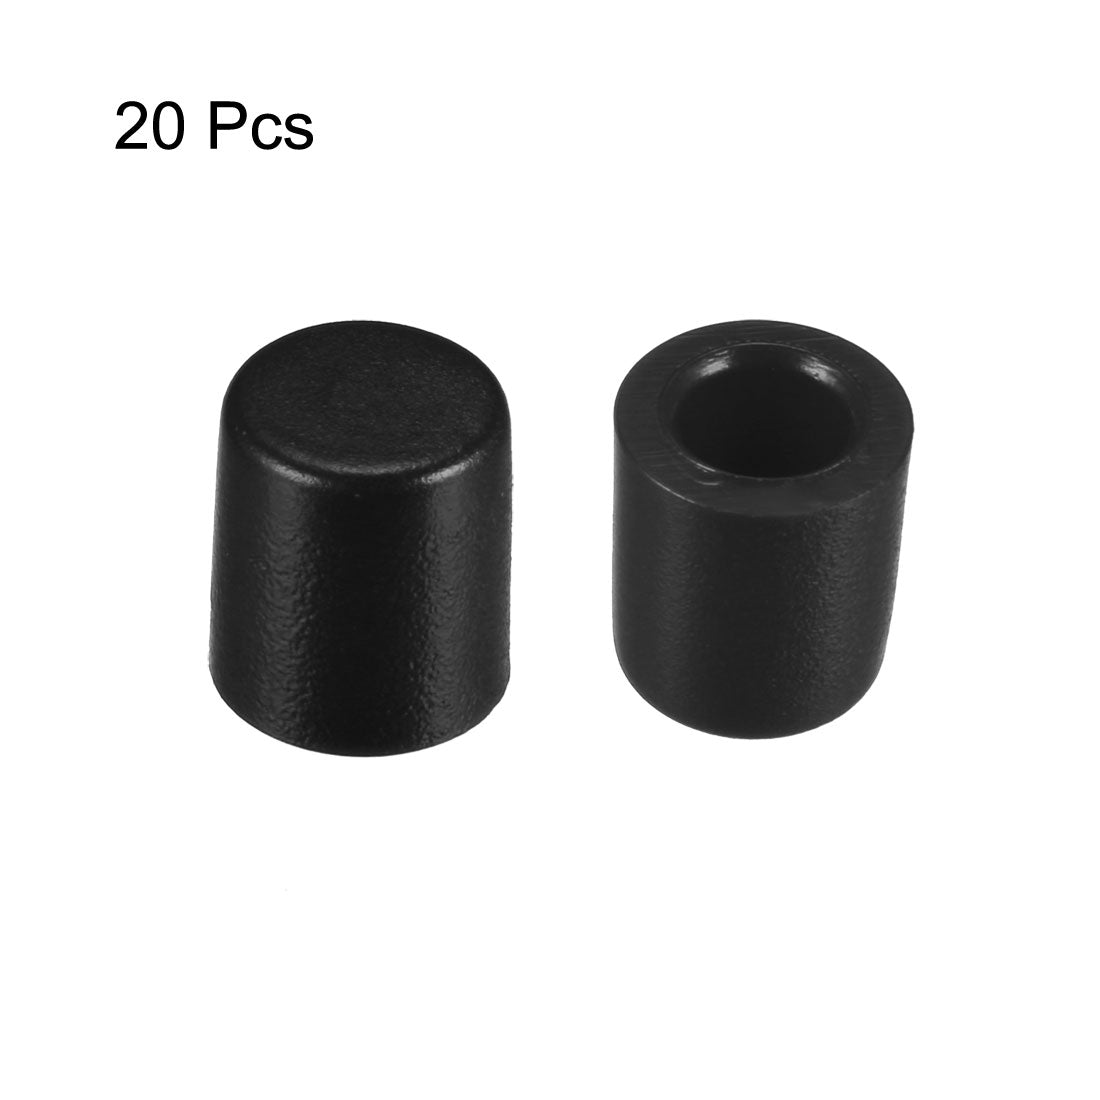 uxcell Uxcell 20Pcs 3.3mm Hole Dia Plastic Push Button Tactile Switch Caps Cover Keycaps Protector Black for 6x6 Tact Switch